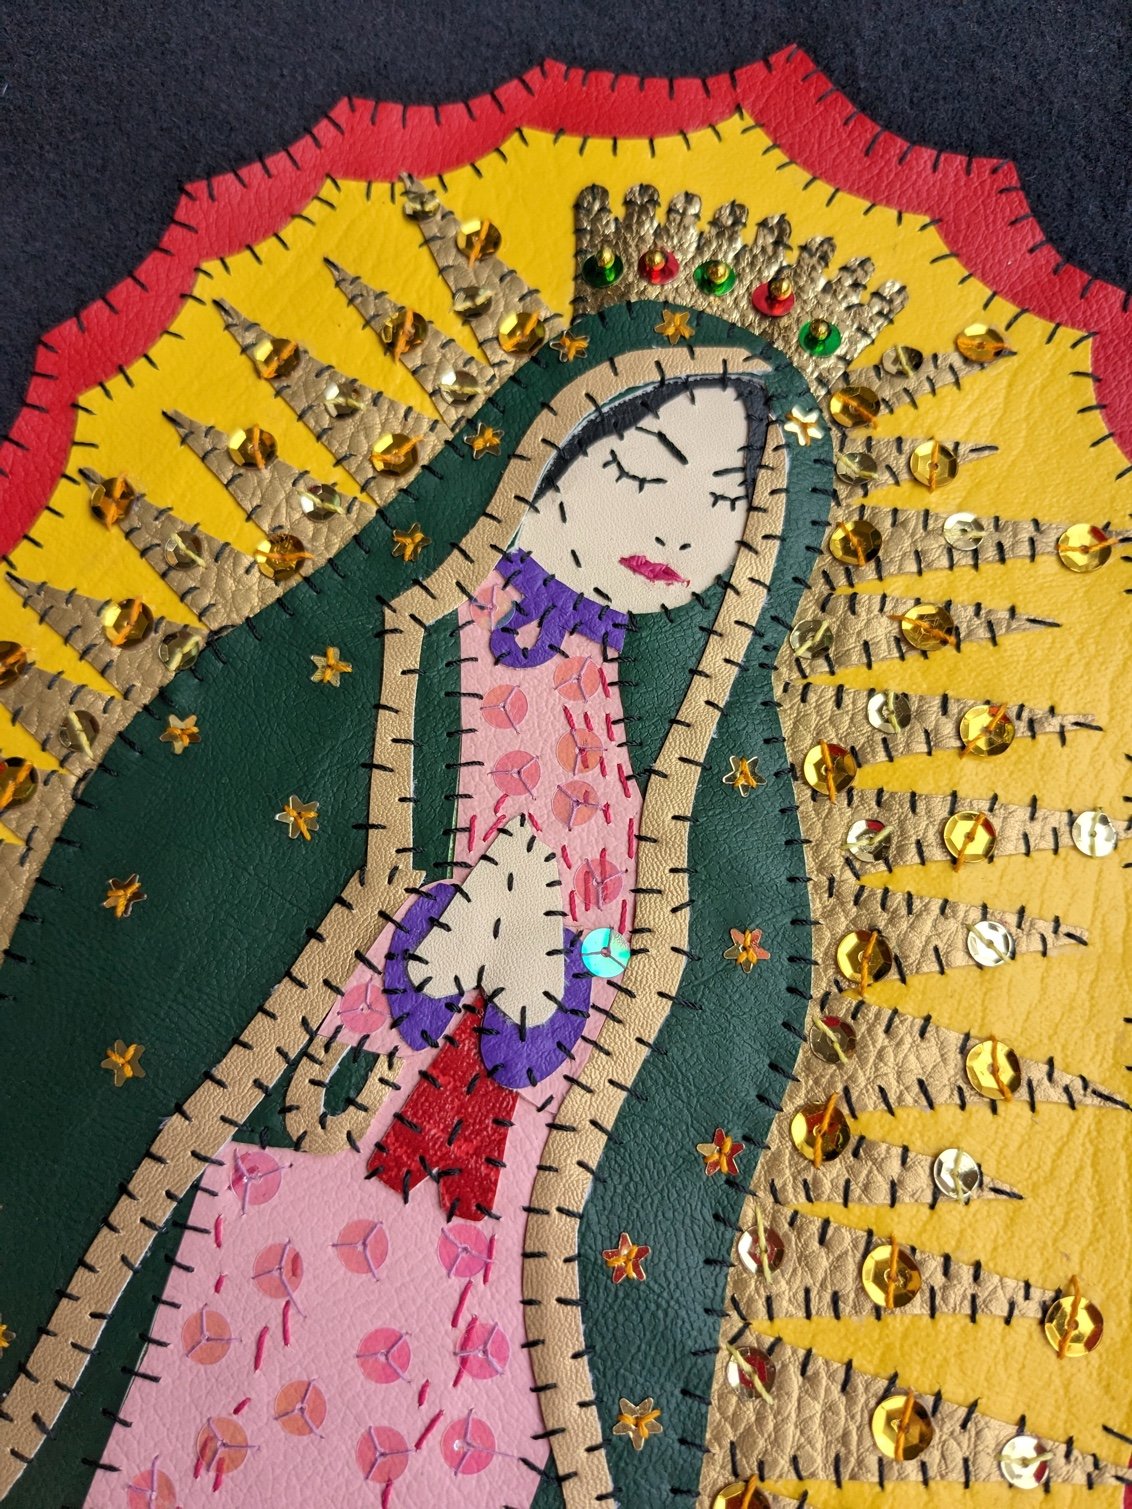 Image of LIMITED EDITION Our Lady of Guadaloupe Bag